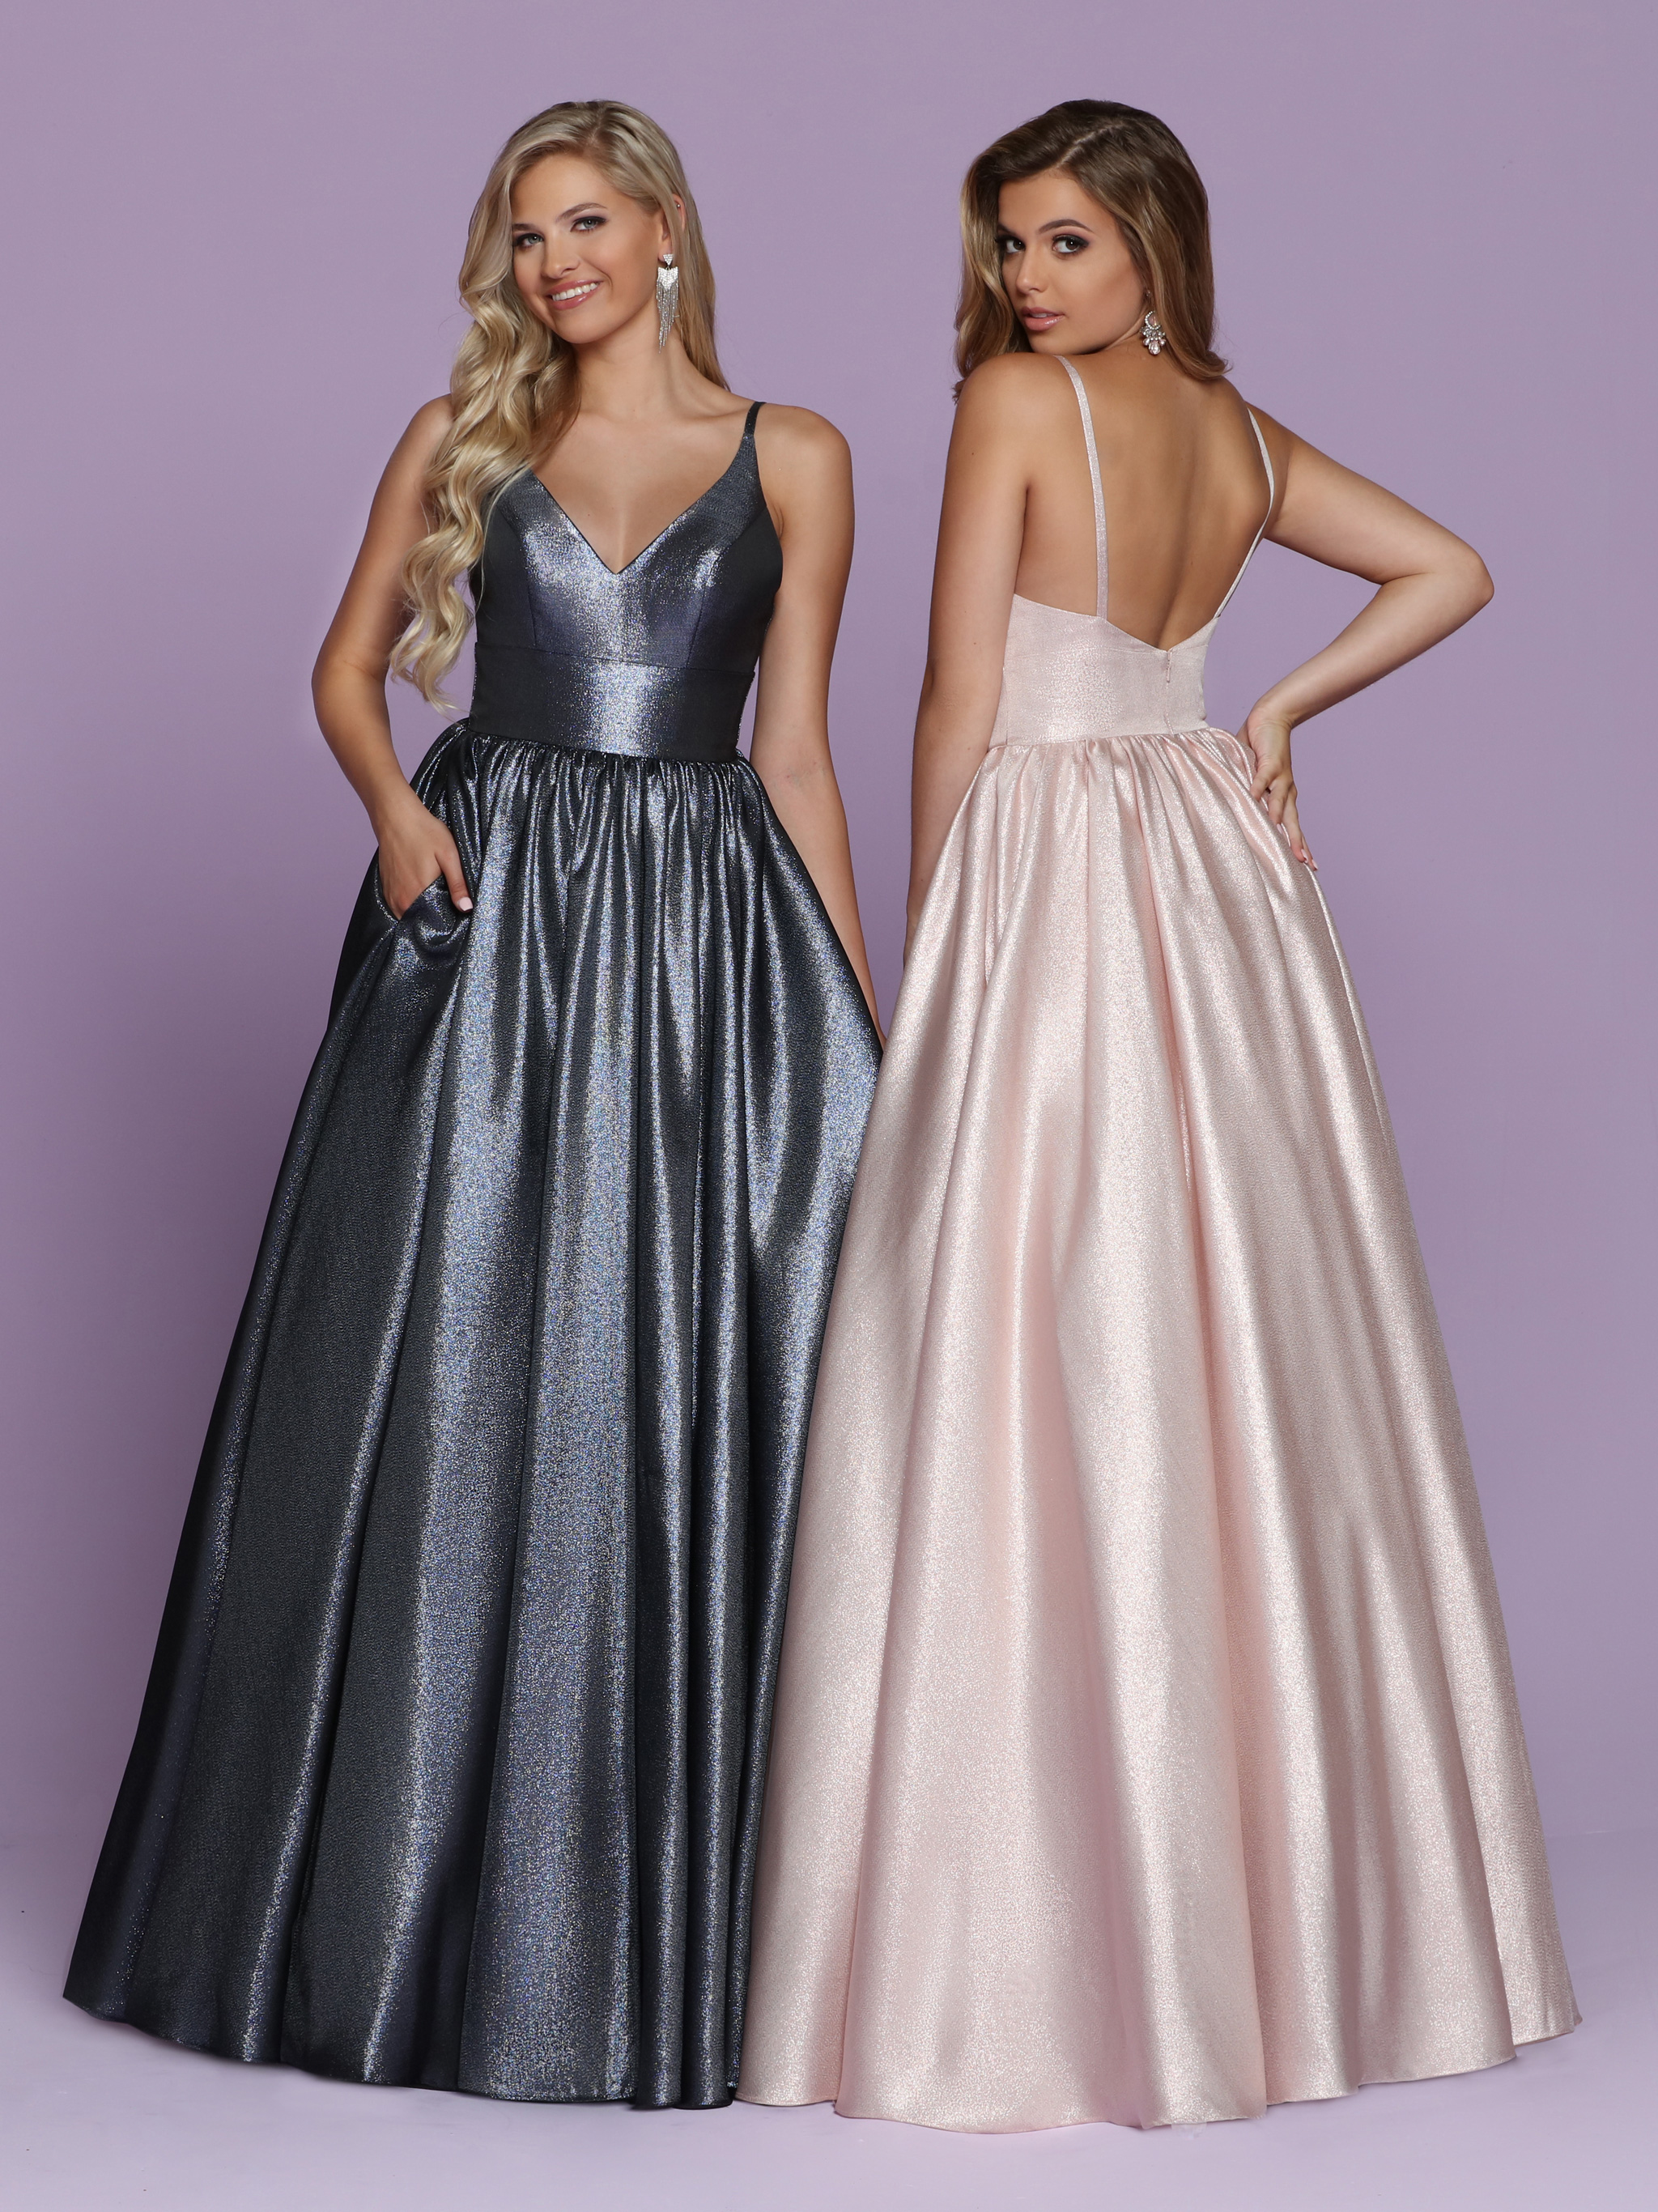 Soft Pastel Ball Gown Prom & Hoco Dresses for 2020 – Sparkle Prom